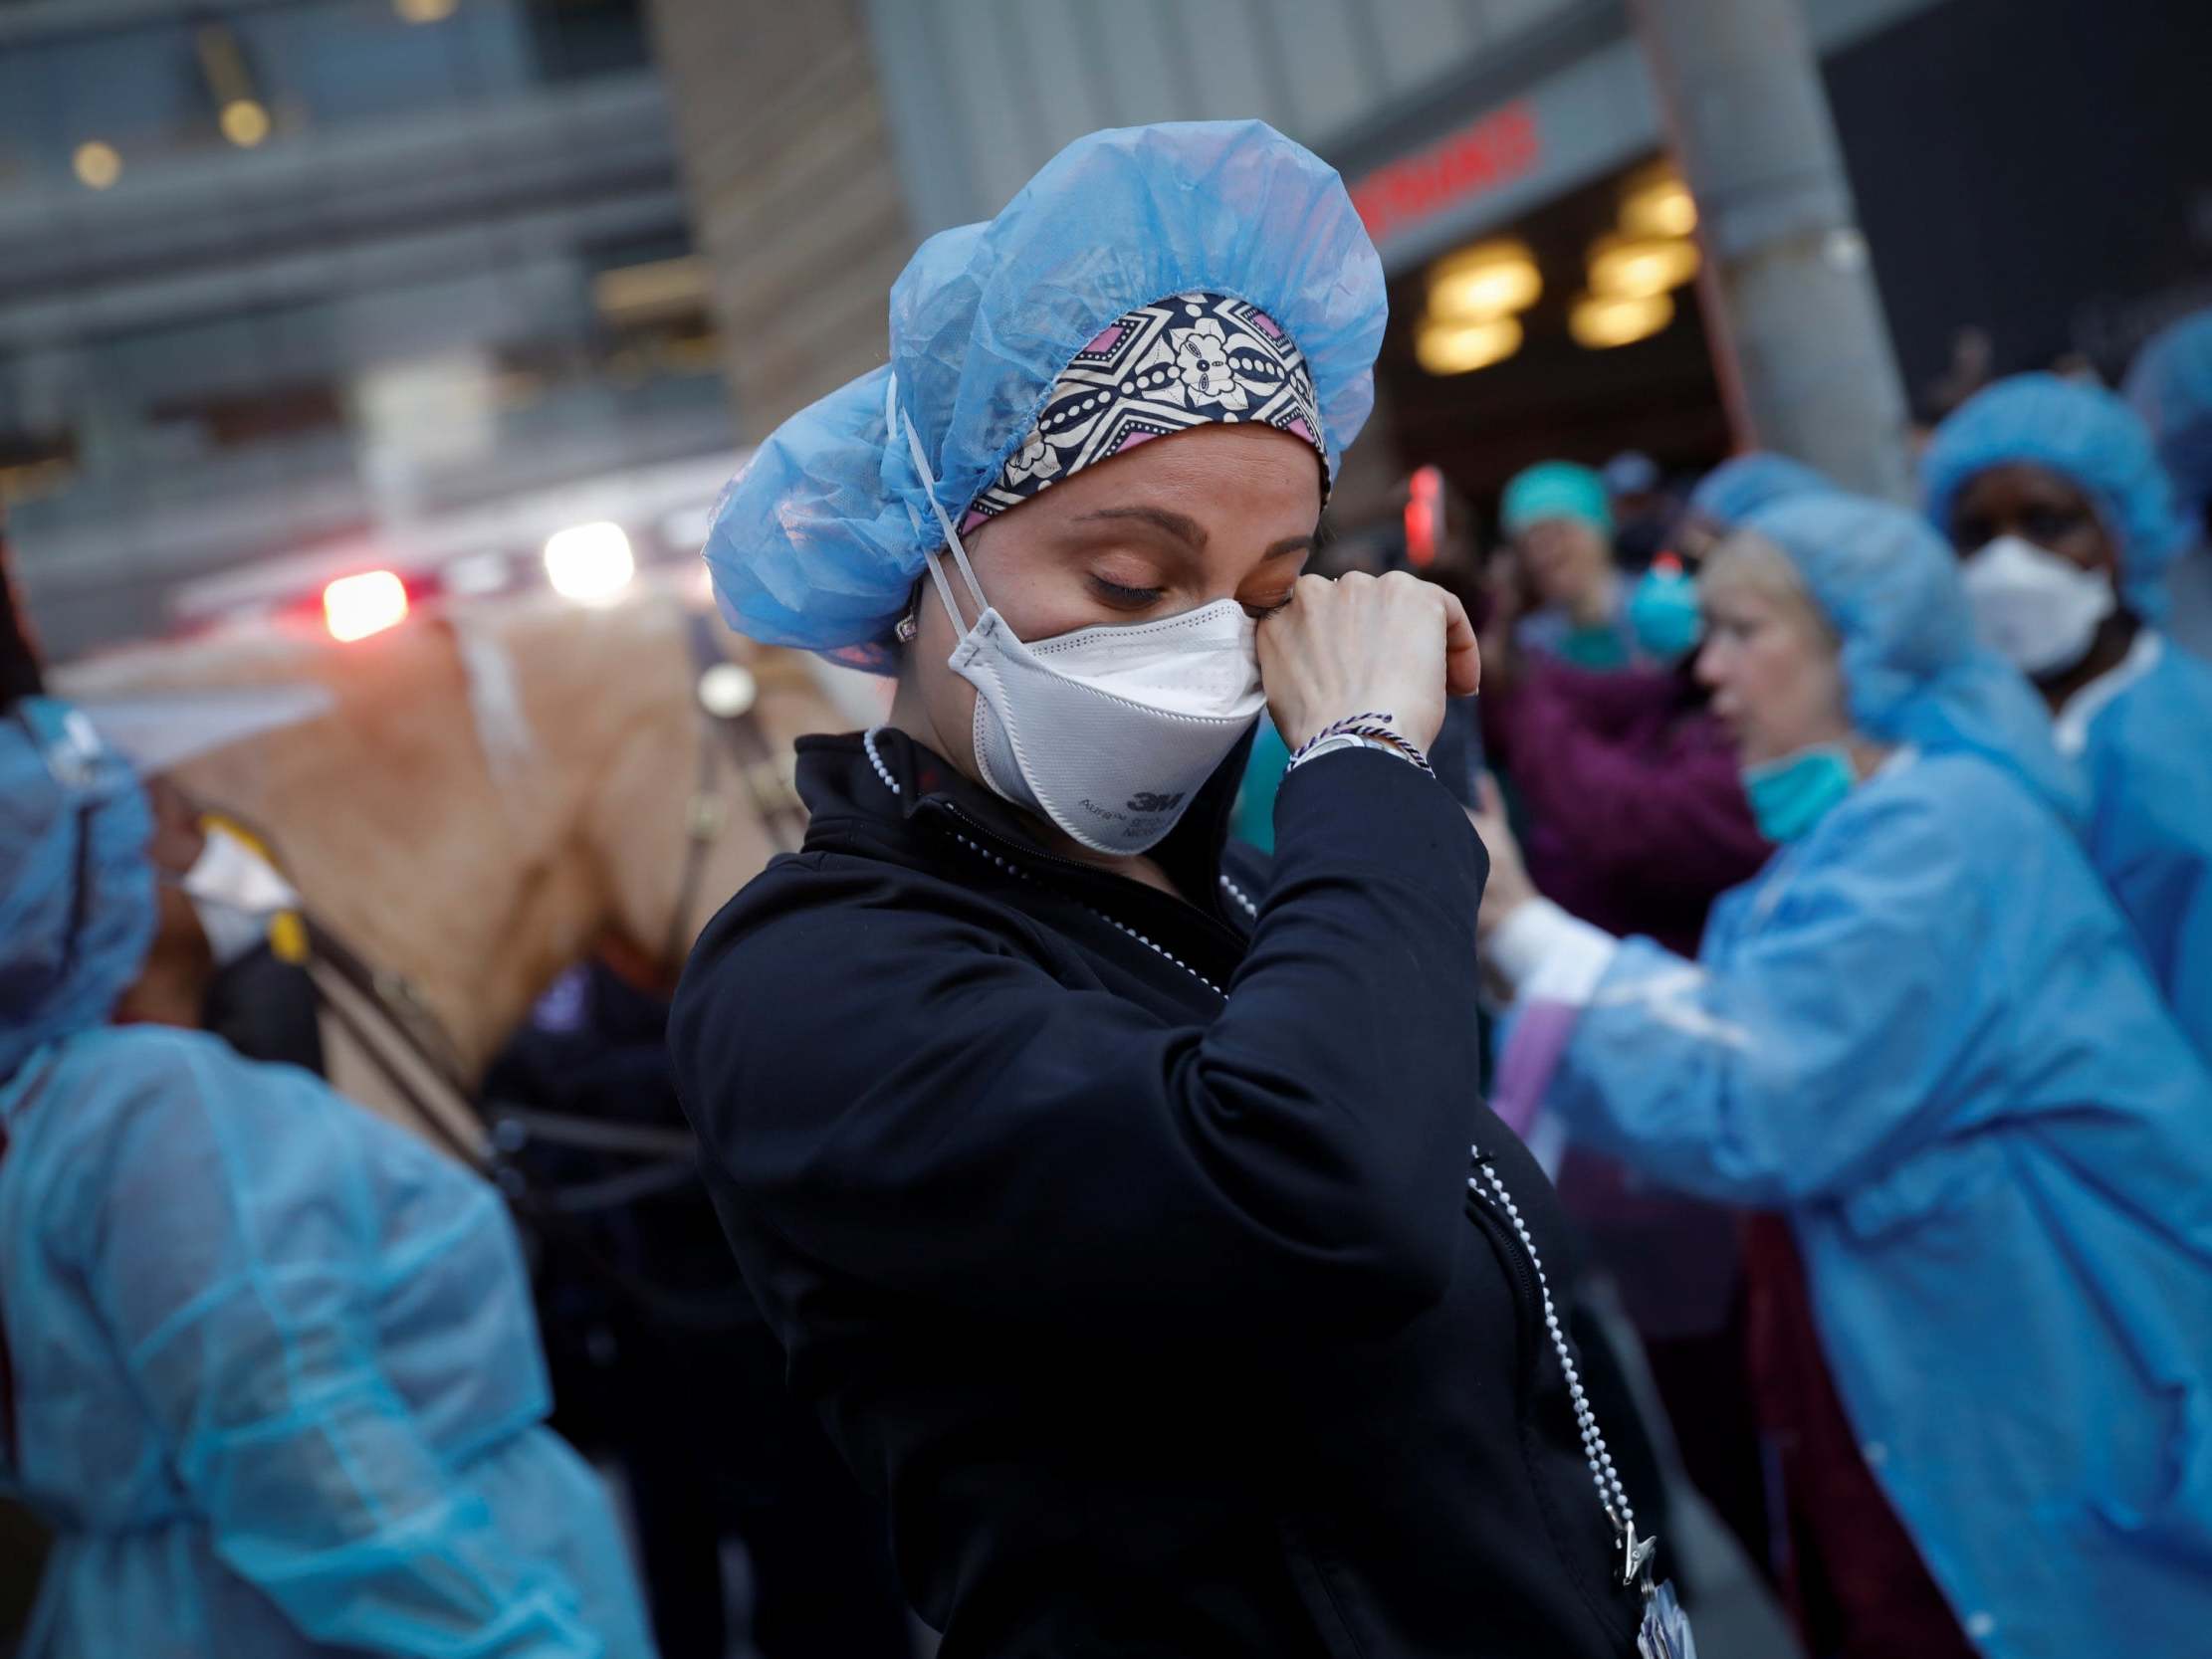 New York state's biggest nursing union claimed the state has failed health workers on the coronavirus frontline